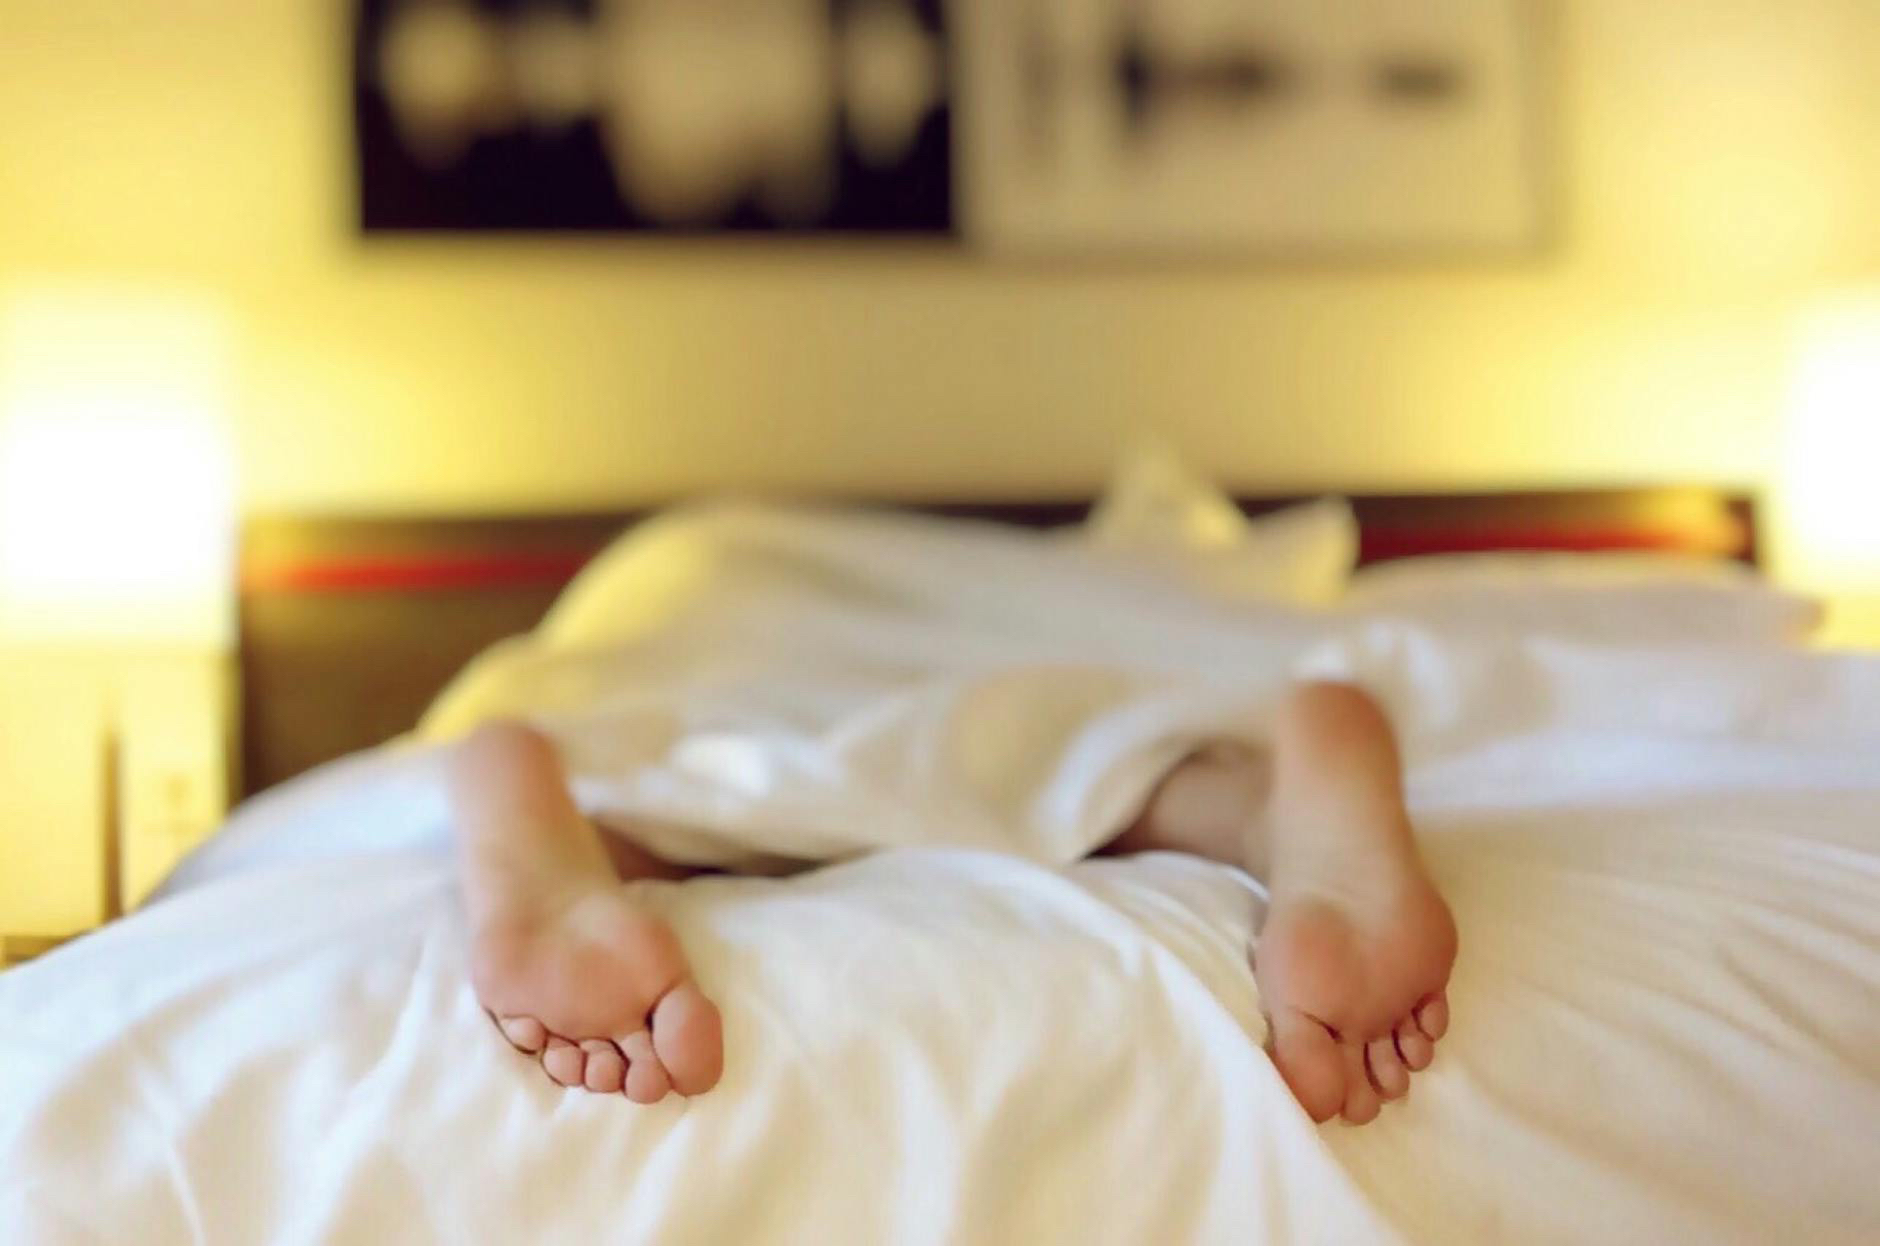 A person's feet protruding from the end of a bed covered with white sheets.